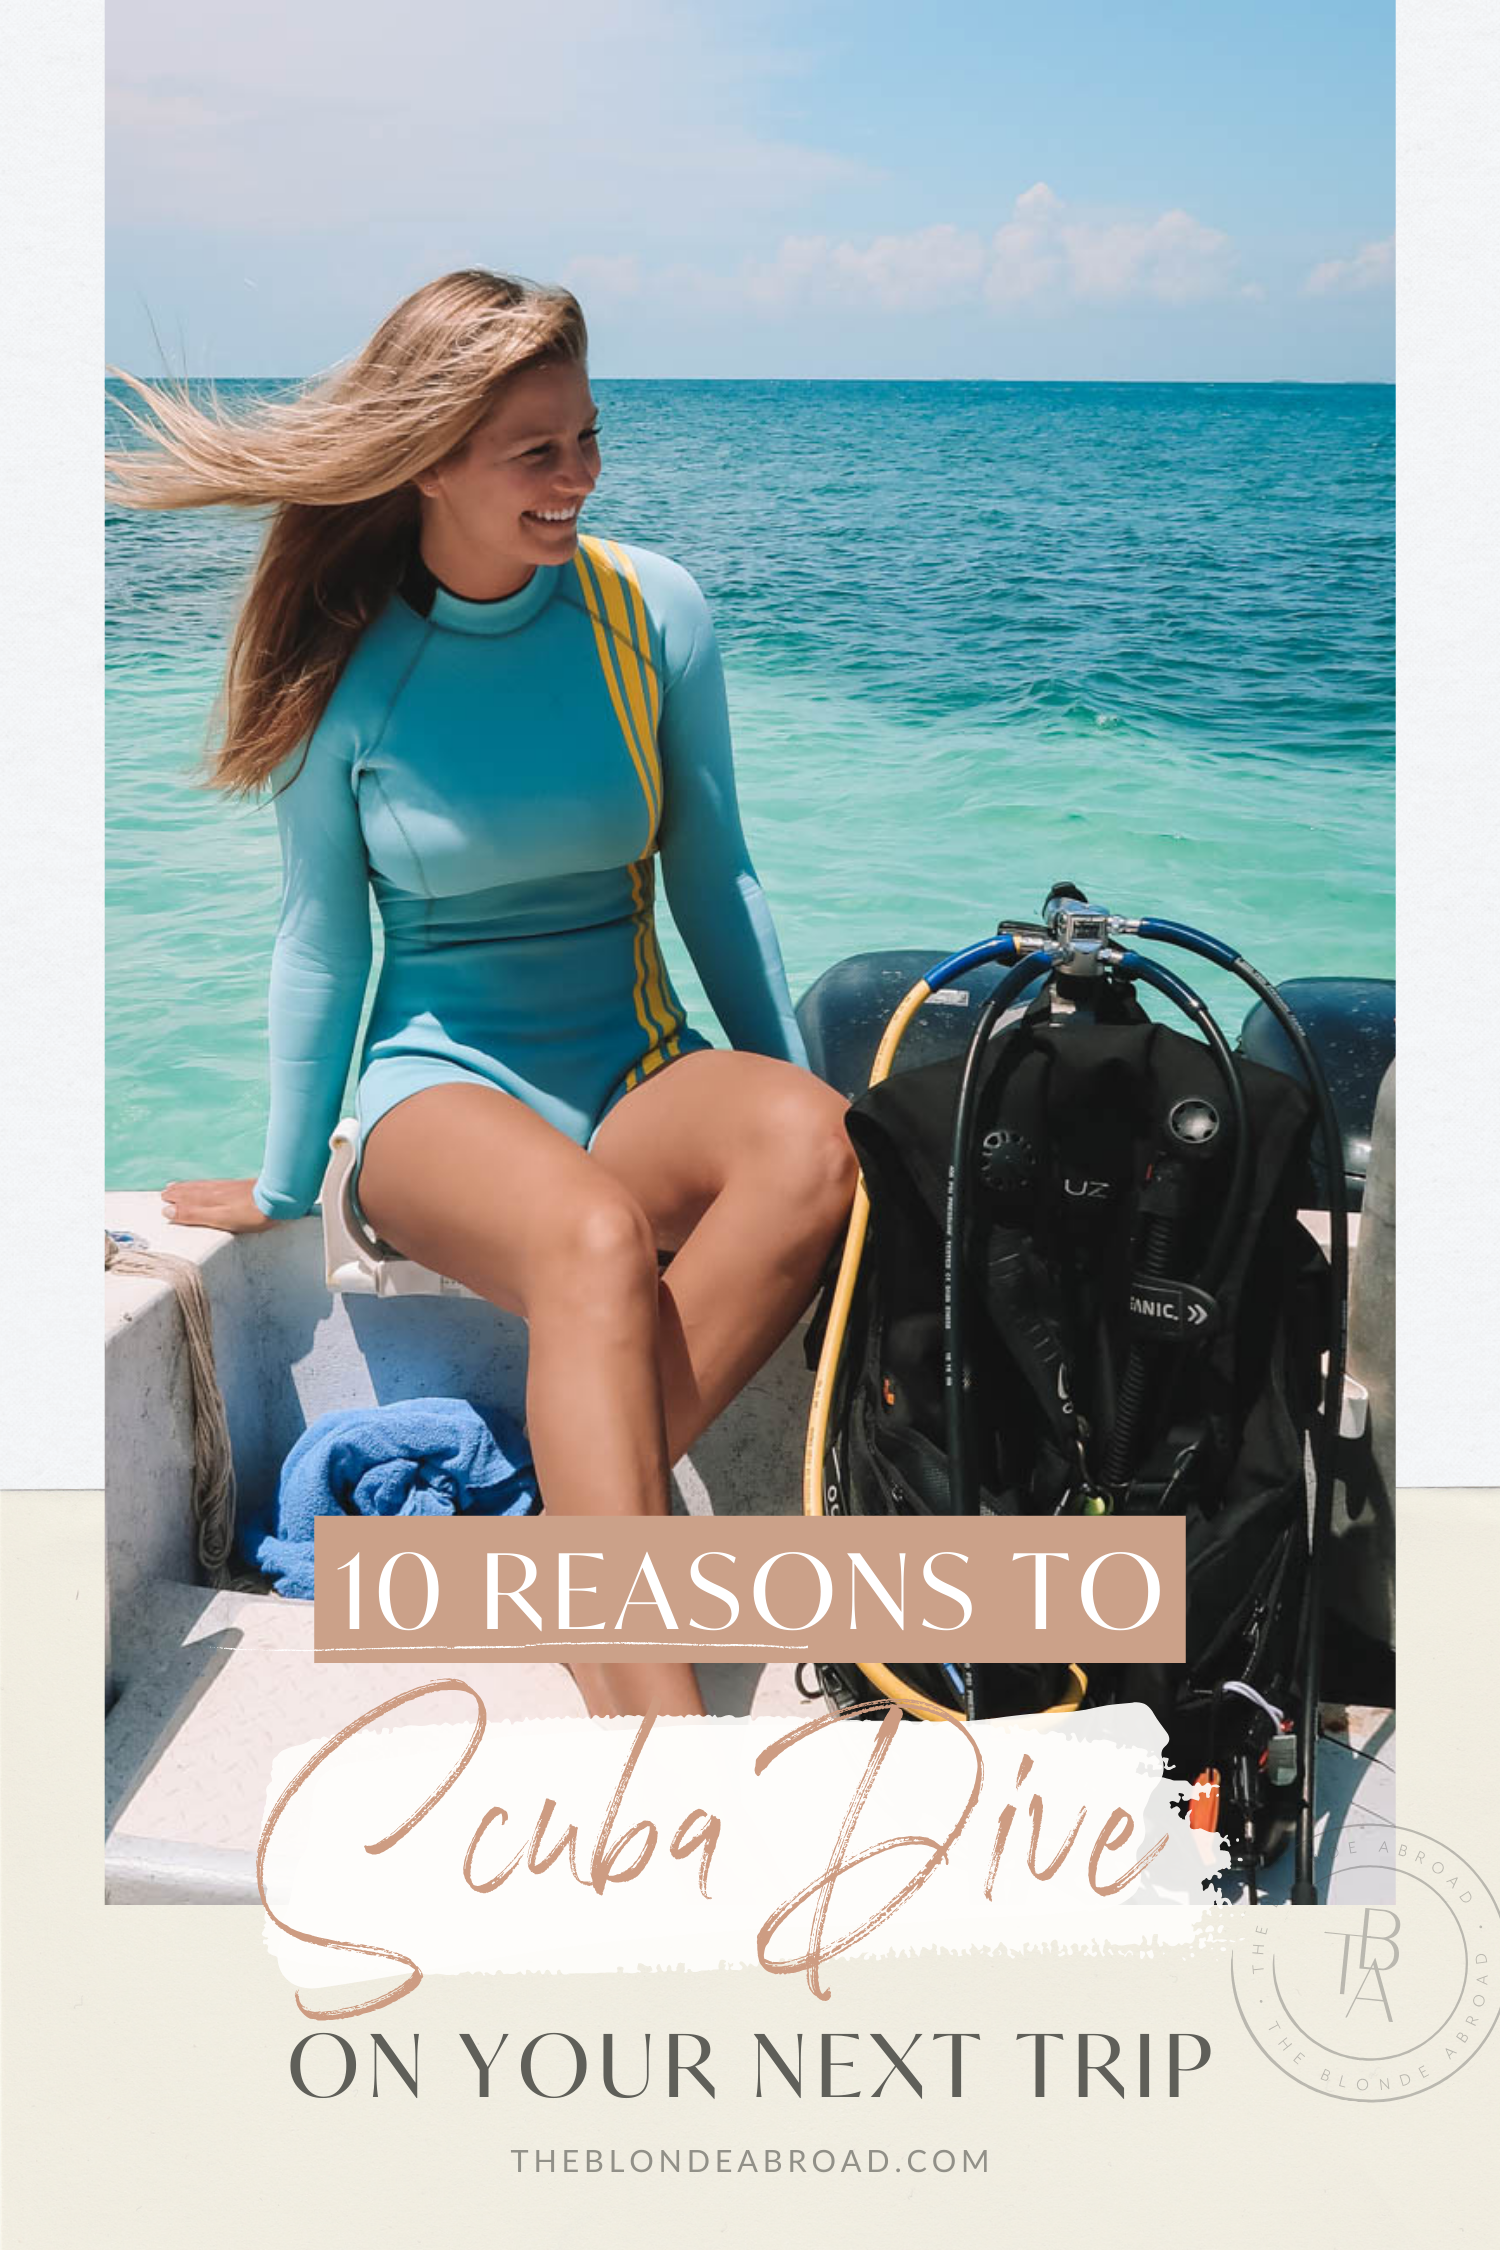 10 Reasons to Scuba Dive on Your Next Trip